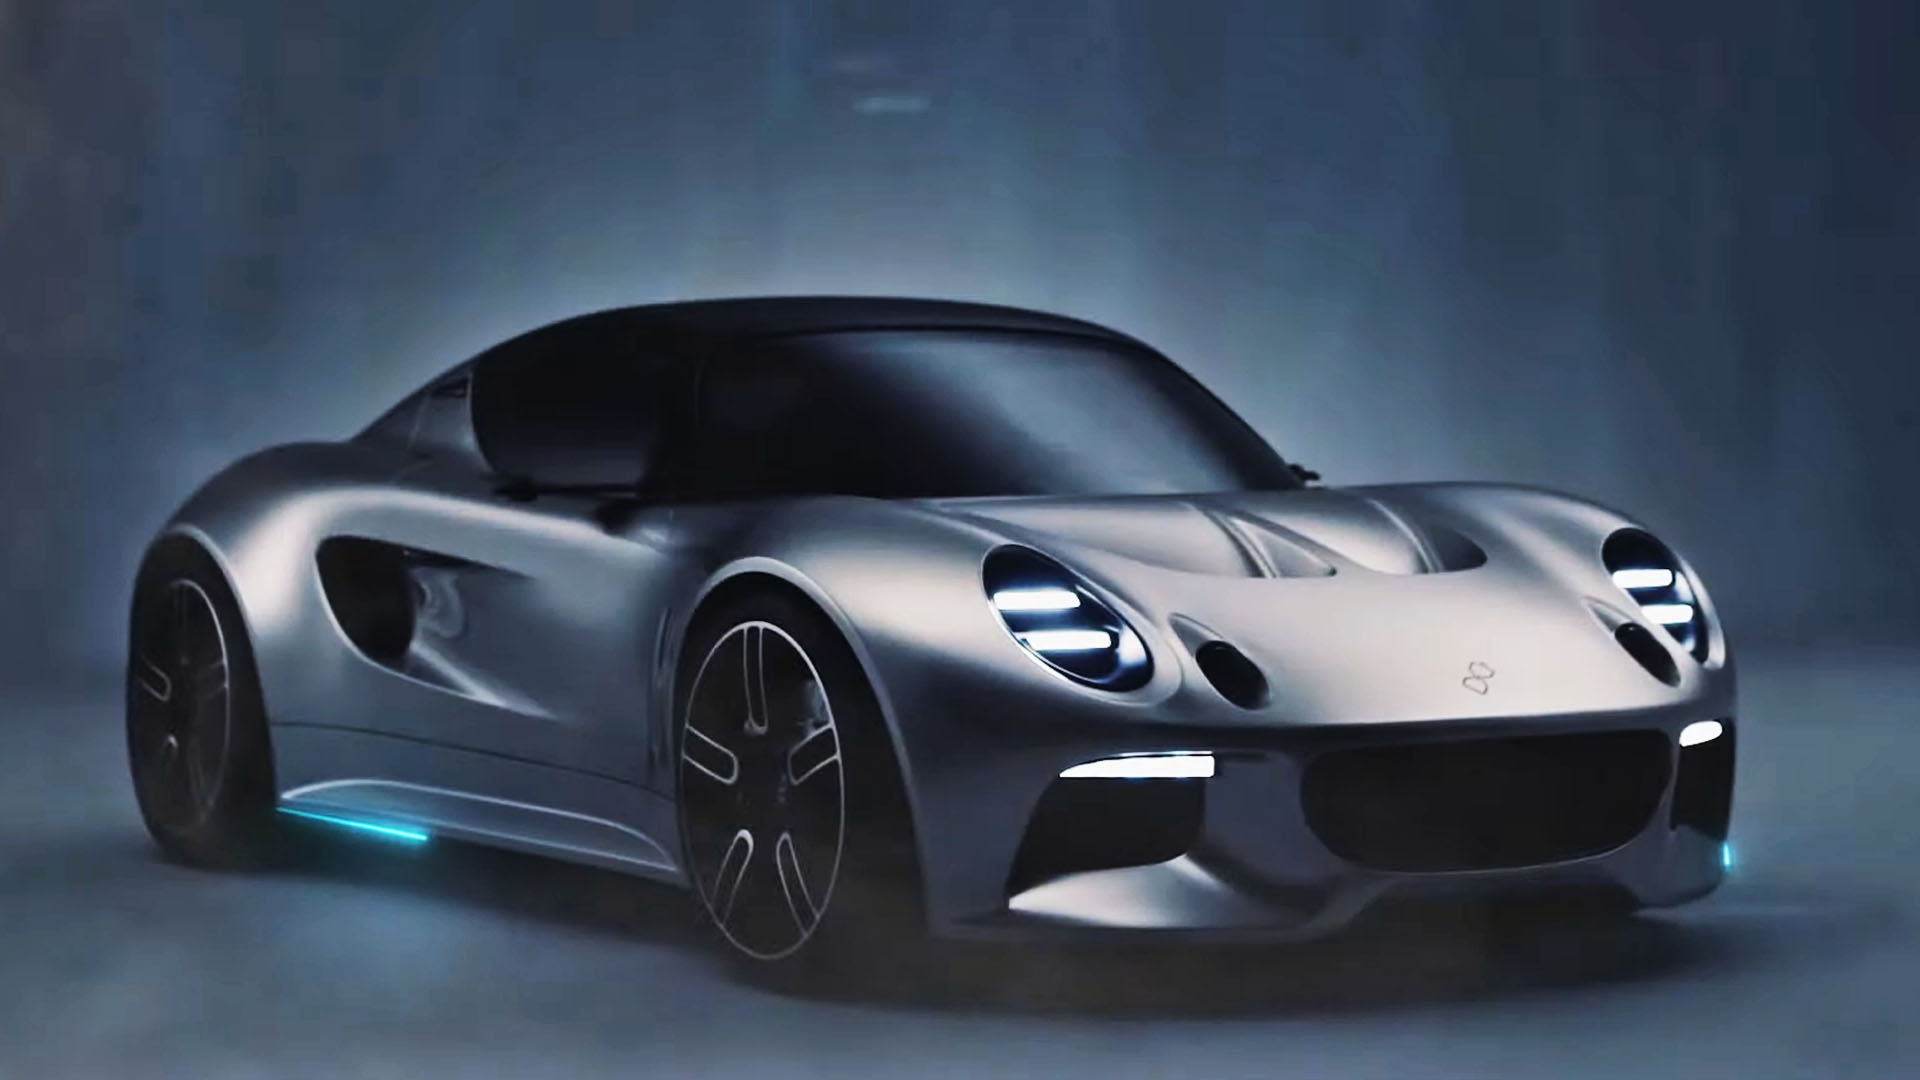 Original Lotus Elise Remade as Lightweight EV That Can Charge In Six Minutes